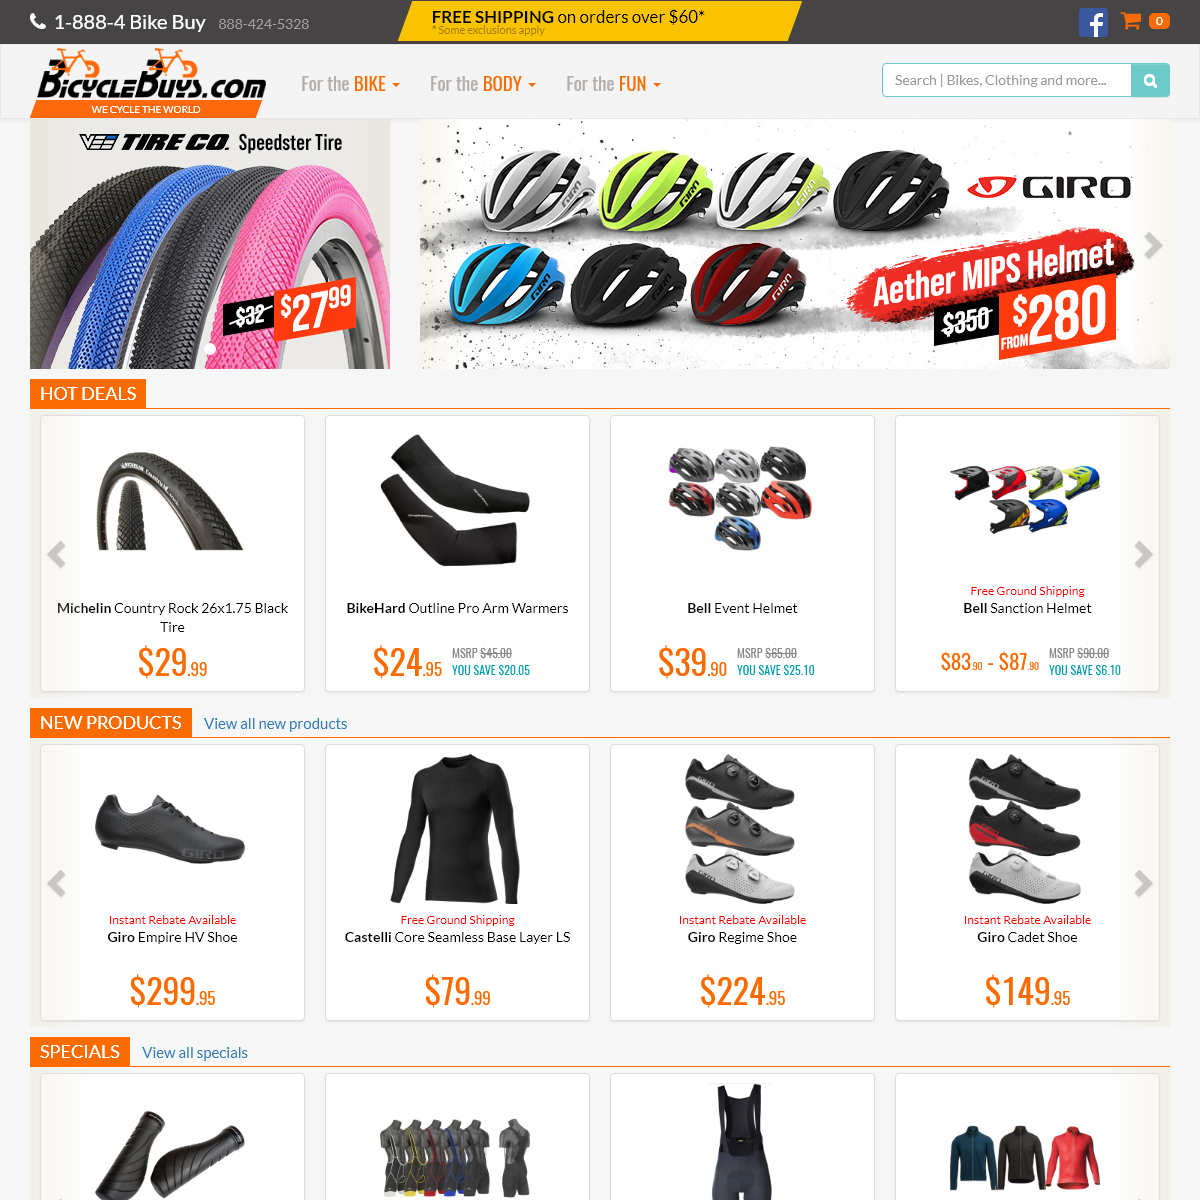 A complete backup of bicyclebuys.com